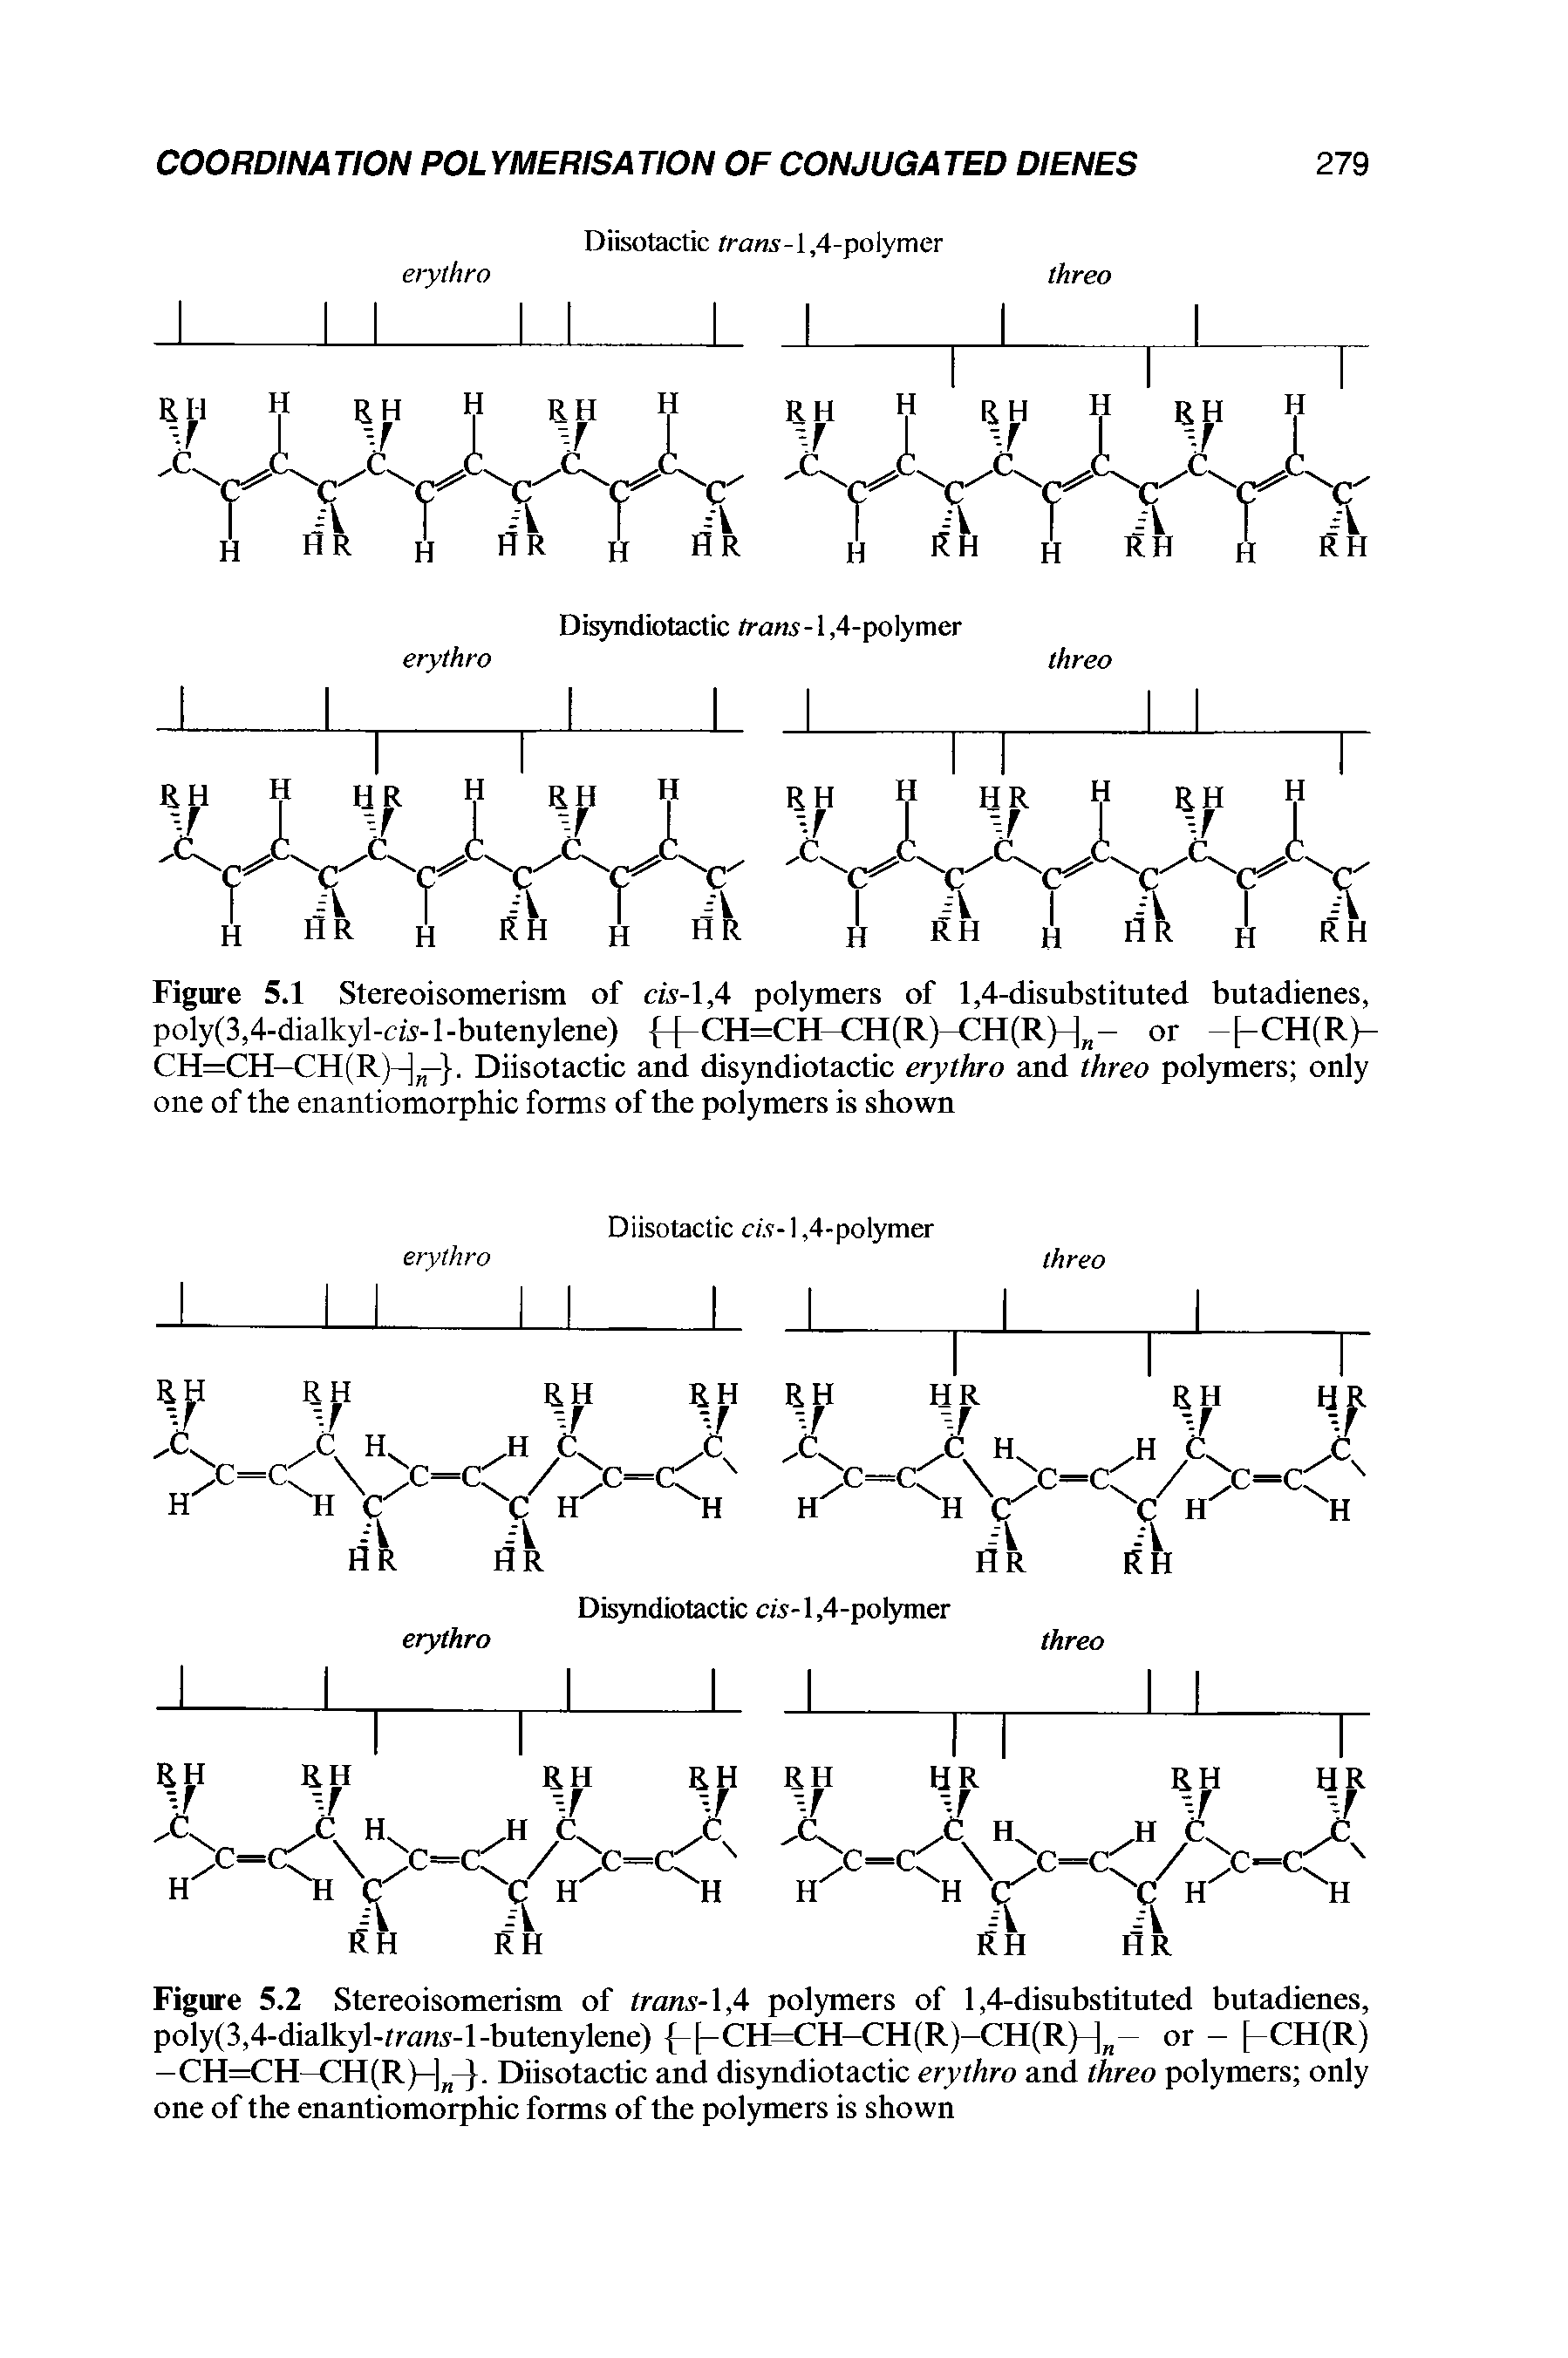 Figure 5.1 Stereoisomerism of cis-, A polymers of 1,4-disubstituted butadienes, poly(3,4-dialkyl-cw-l-butenylene) CH=CH CH(R) CH(R) n- or [-CH(R>-CH=CH—CH(R)—] —. Diisotactic and disyndiotactic erythro and threo polymers only one of the enantiomorphic forms of the polymers is shown...